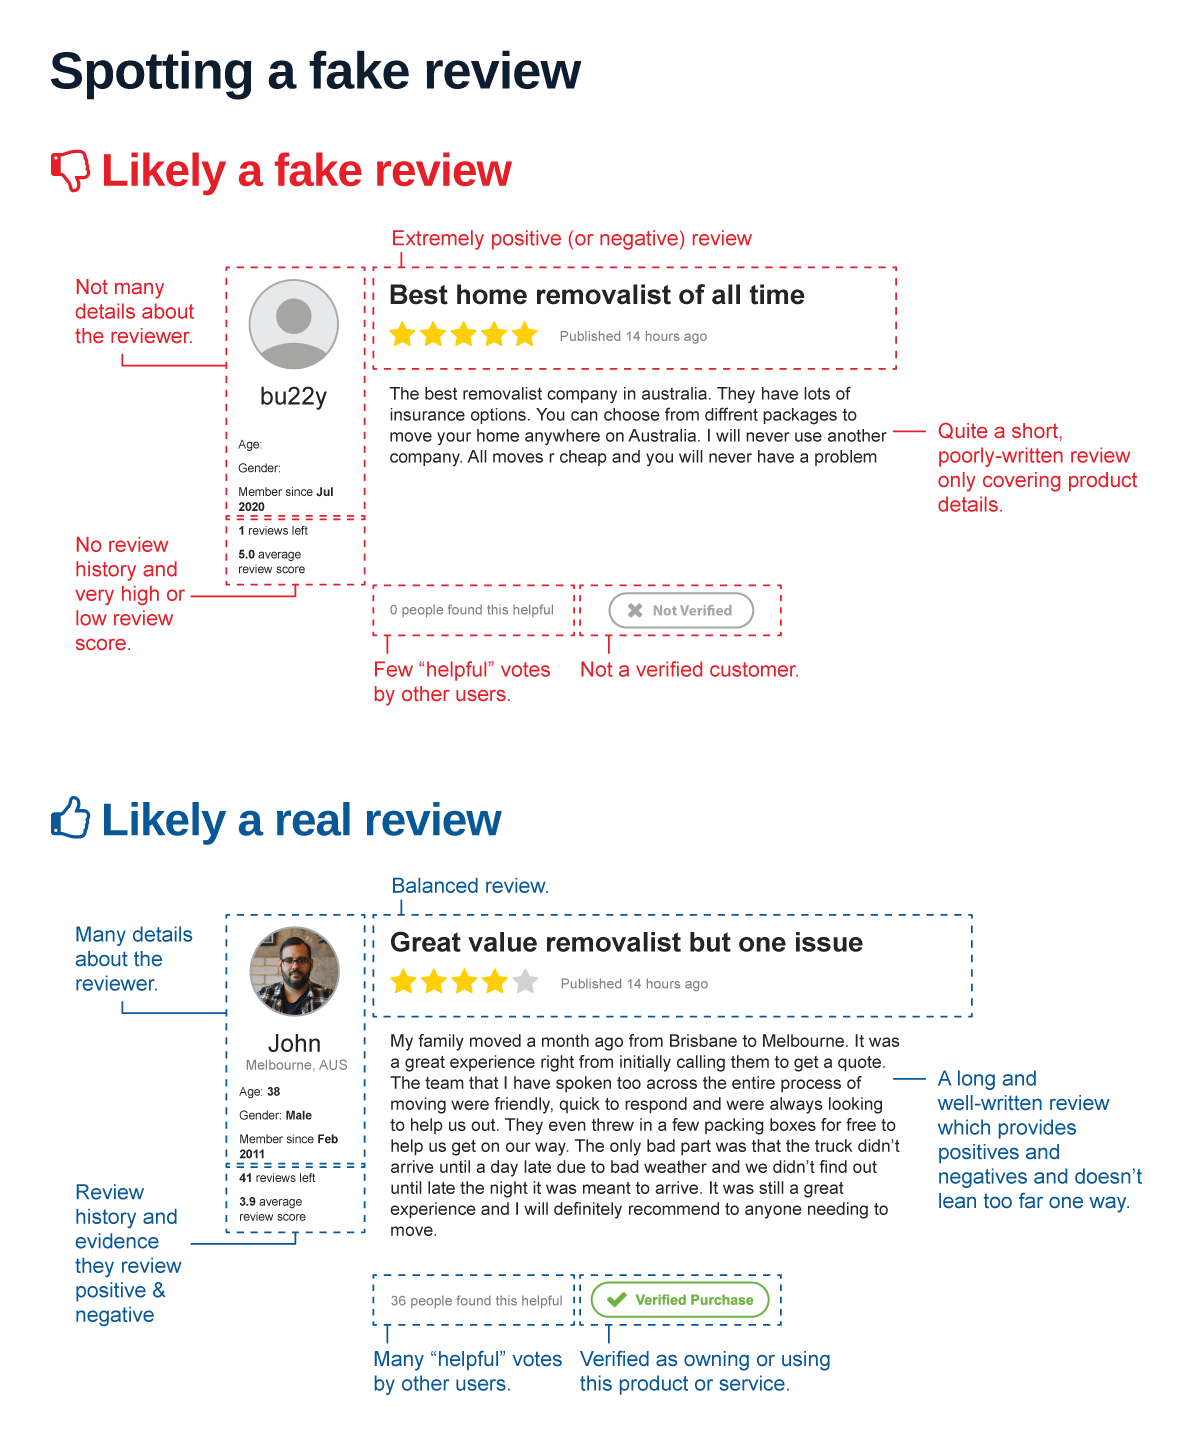 Infographic of a fake review and a real review and their differences